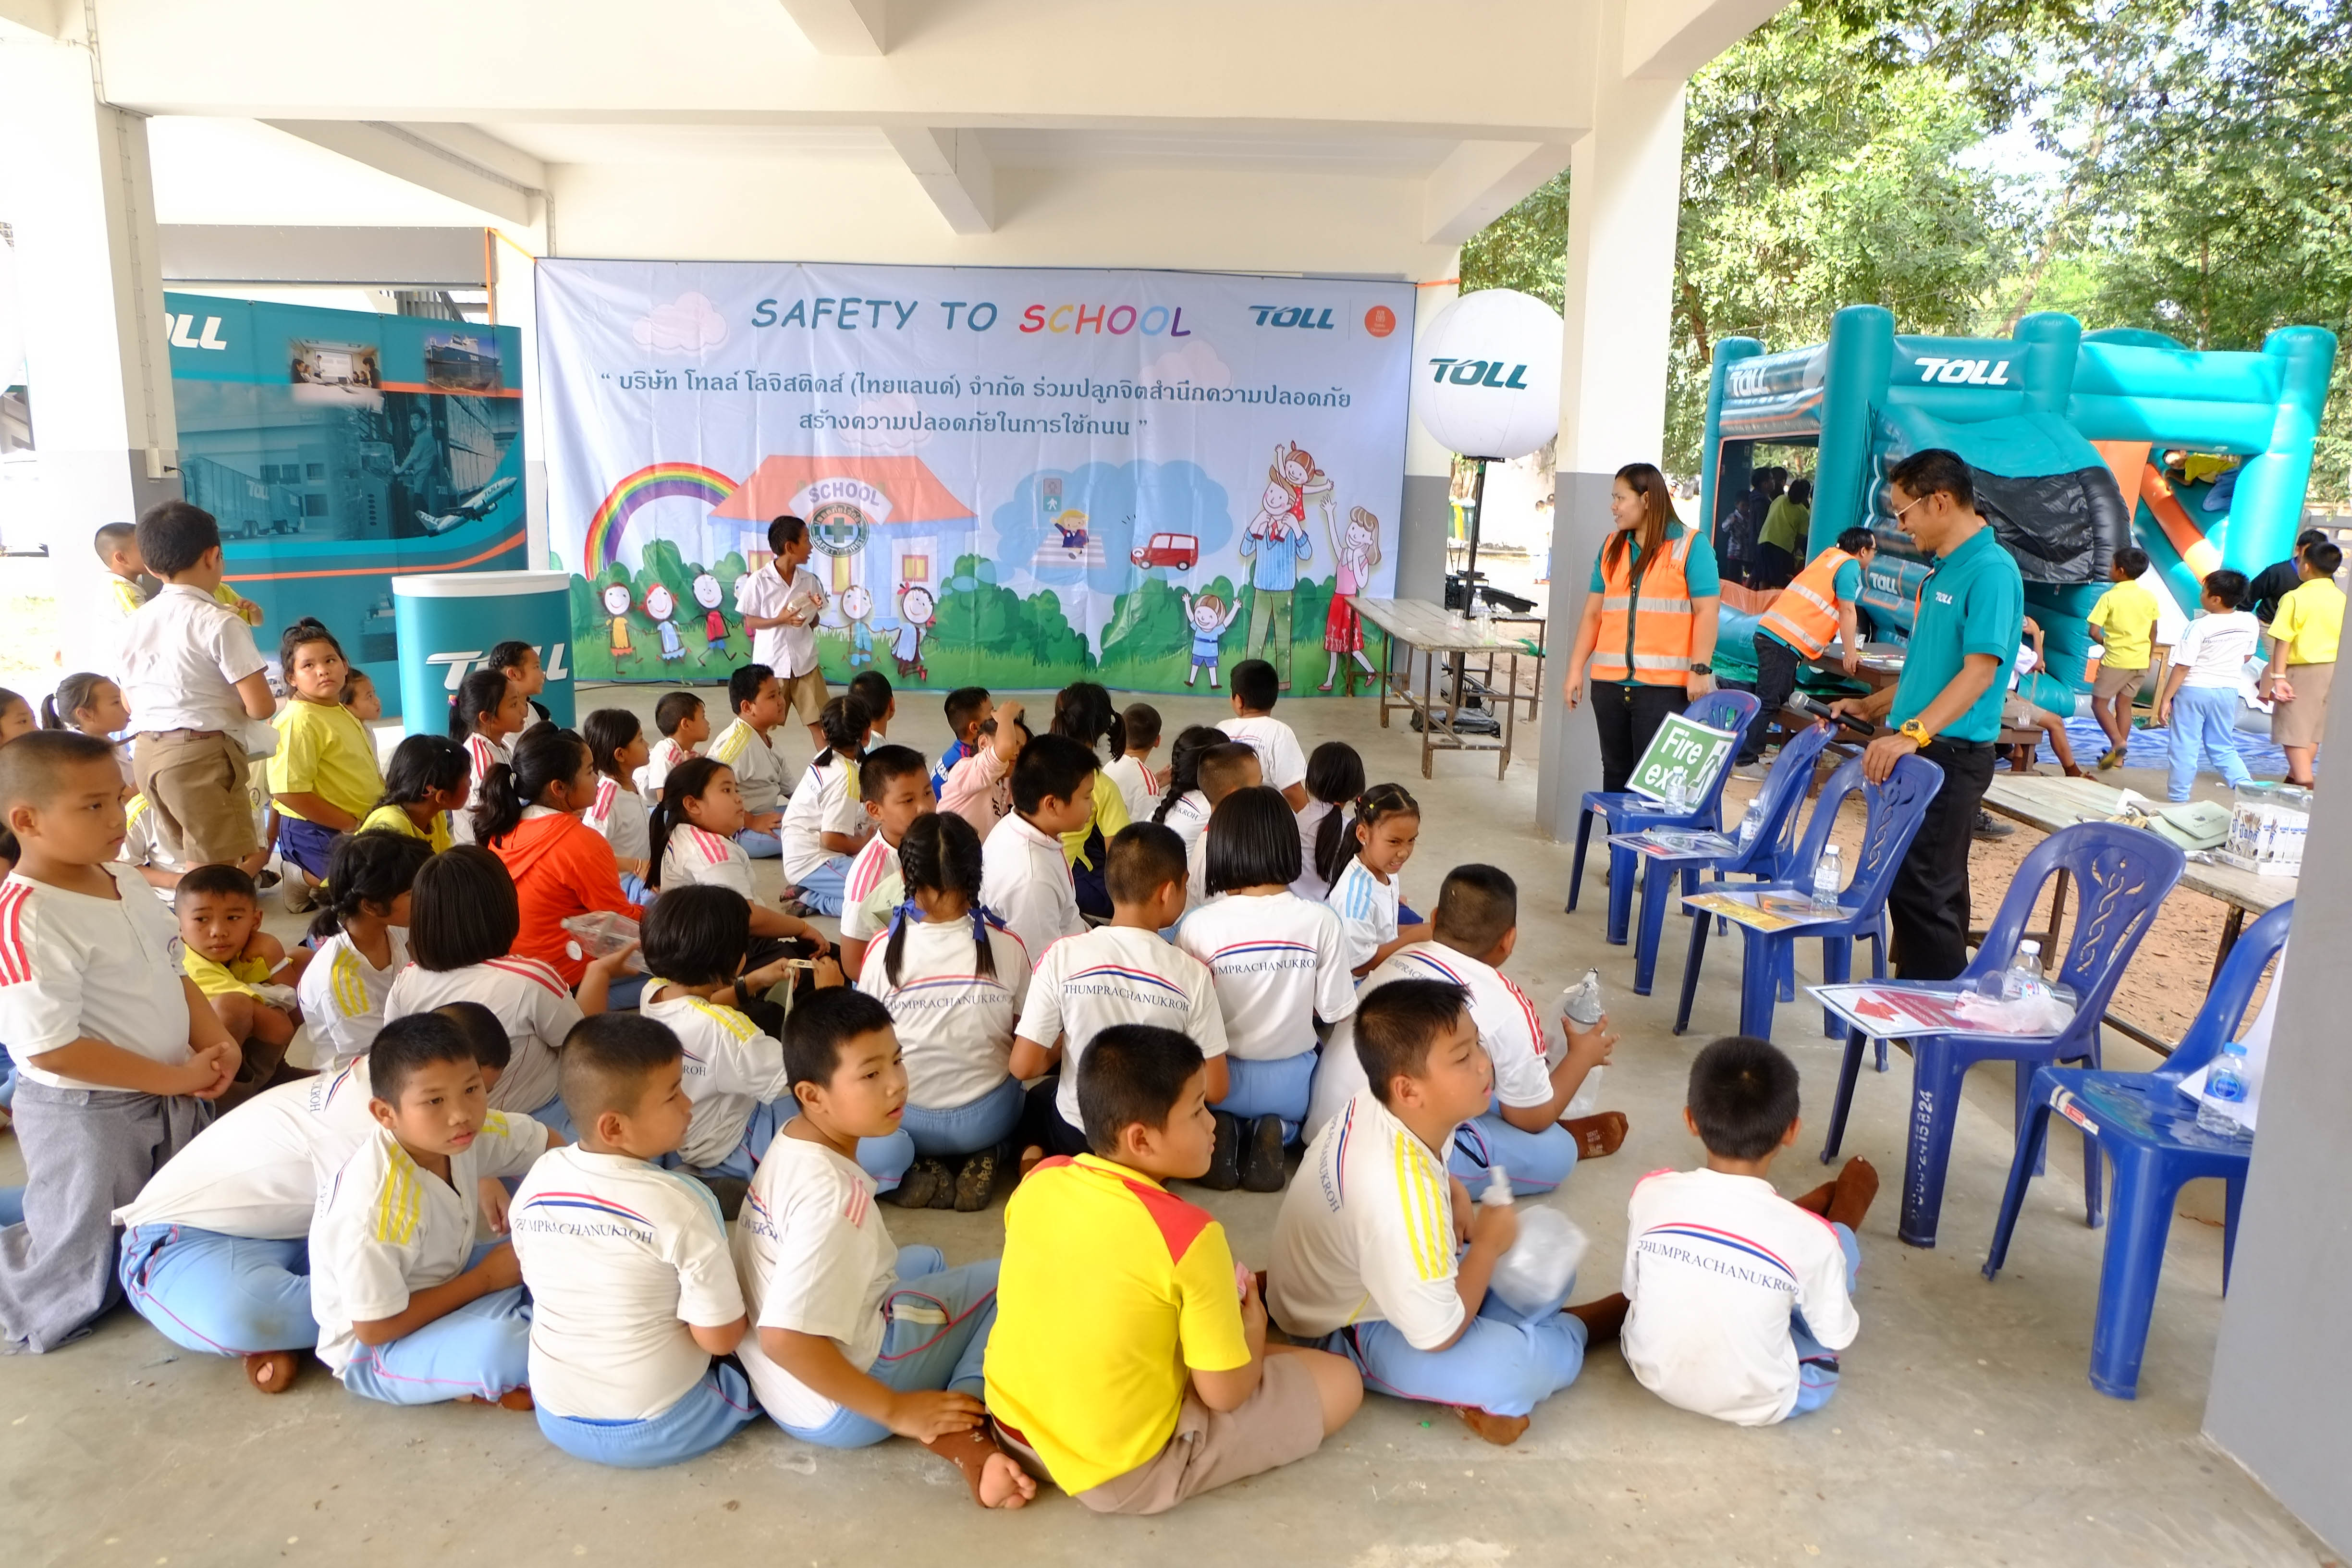 Our Toll team hosted a Safety School Day in Thailand